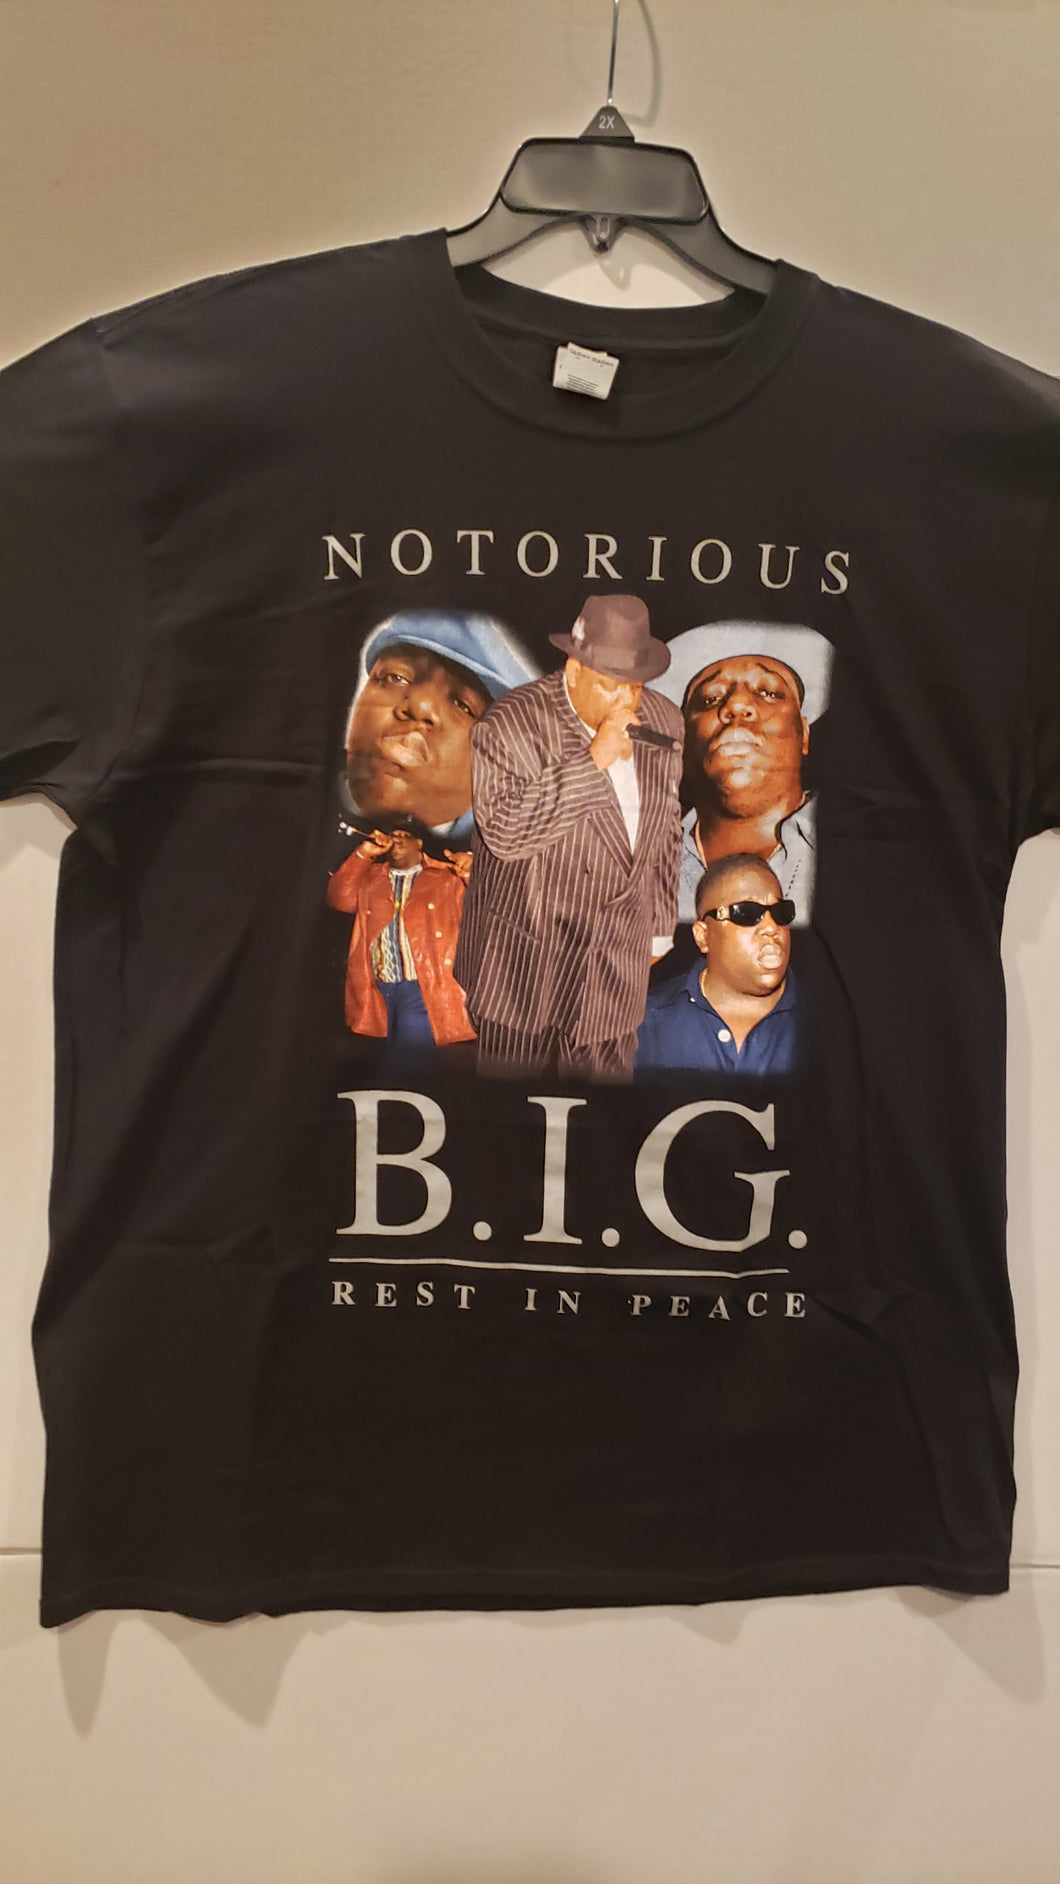 NOTORIOUS B.I.G T-SHIRT BRAND NEW 2XL -COLLAGE